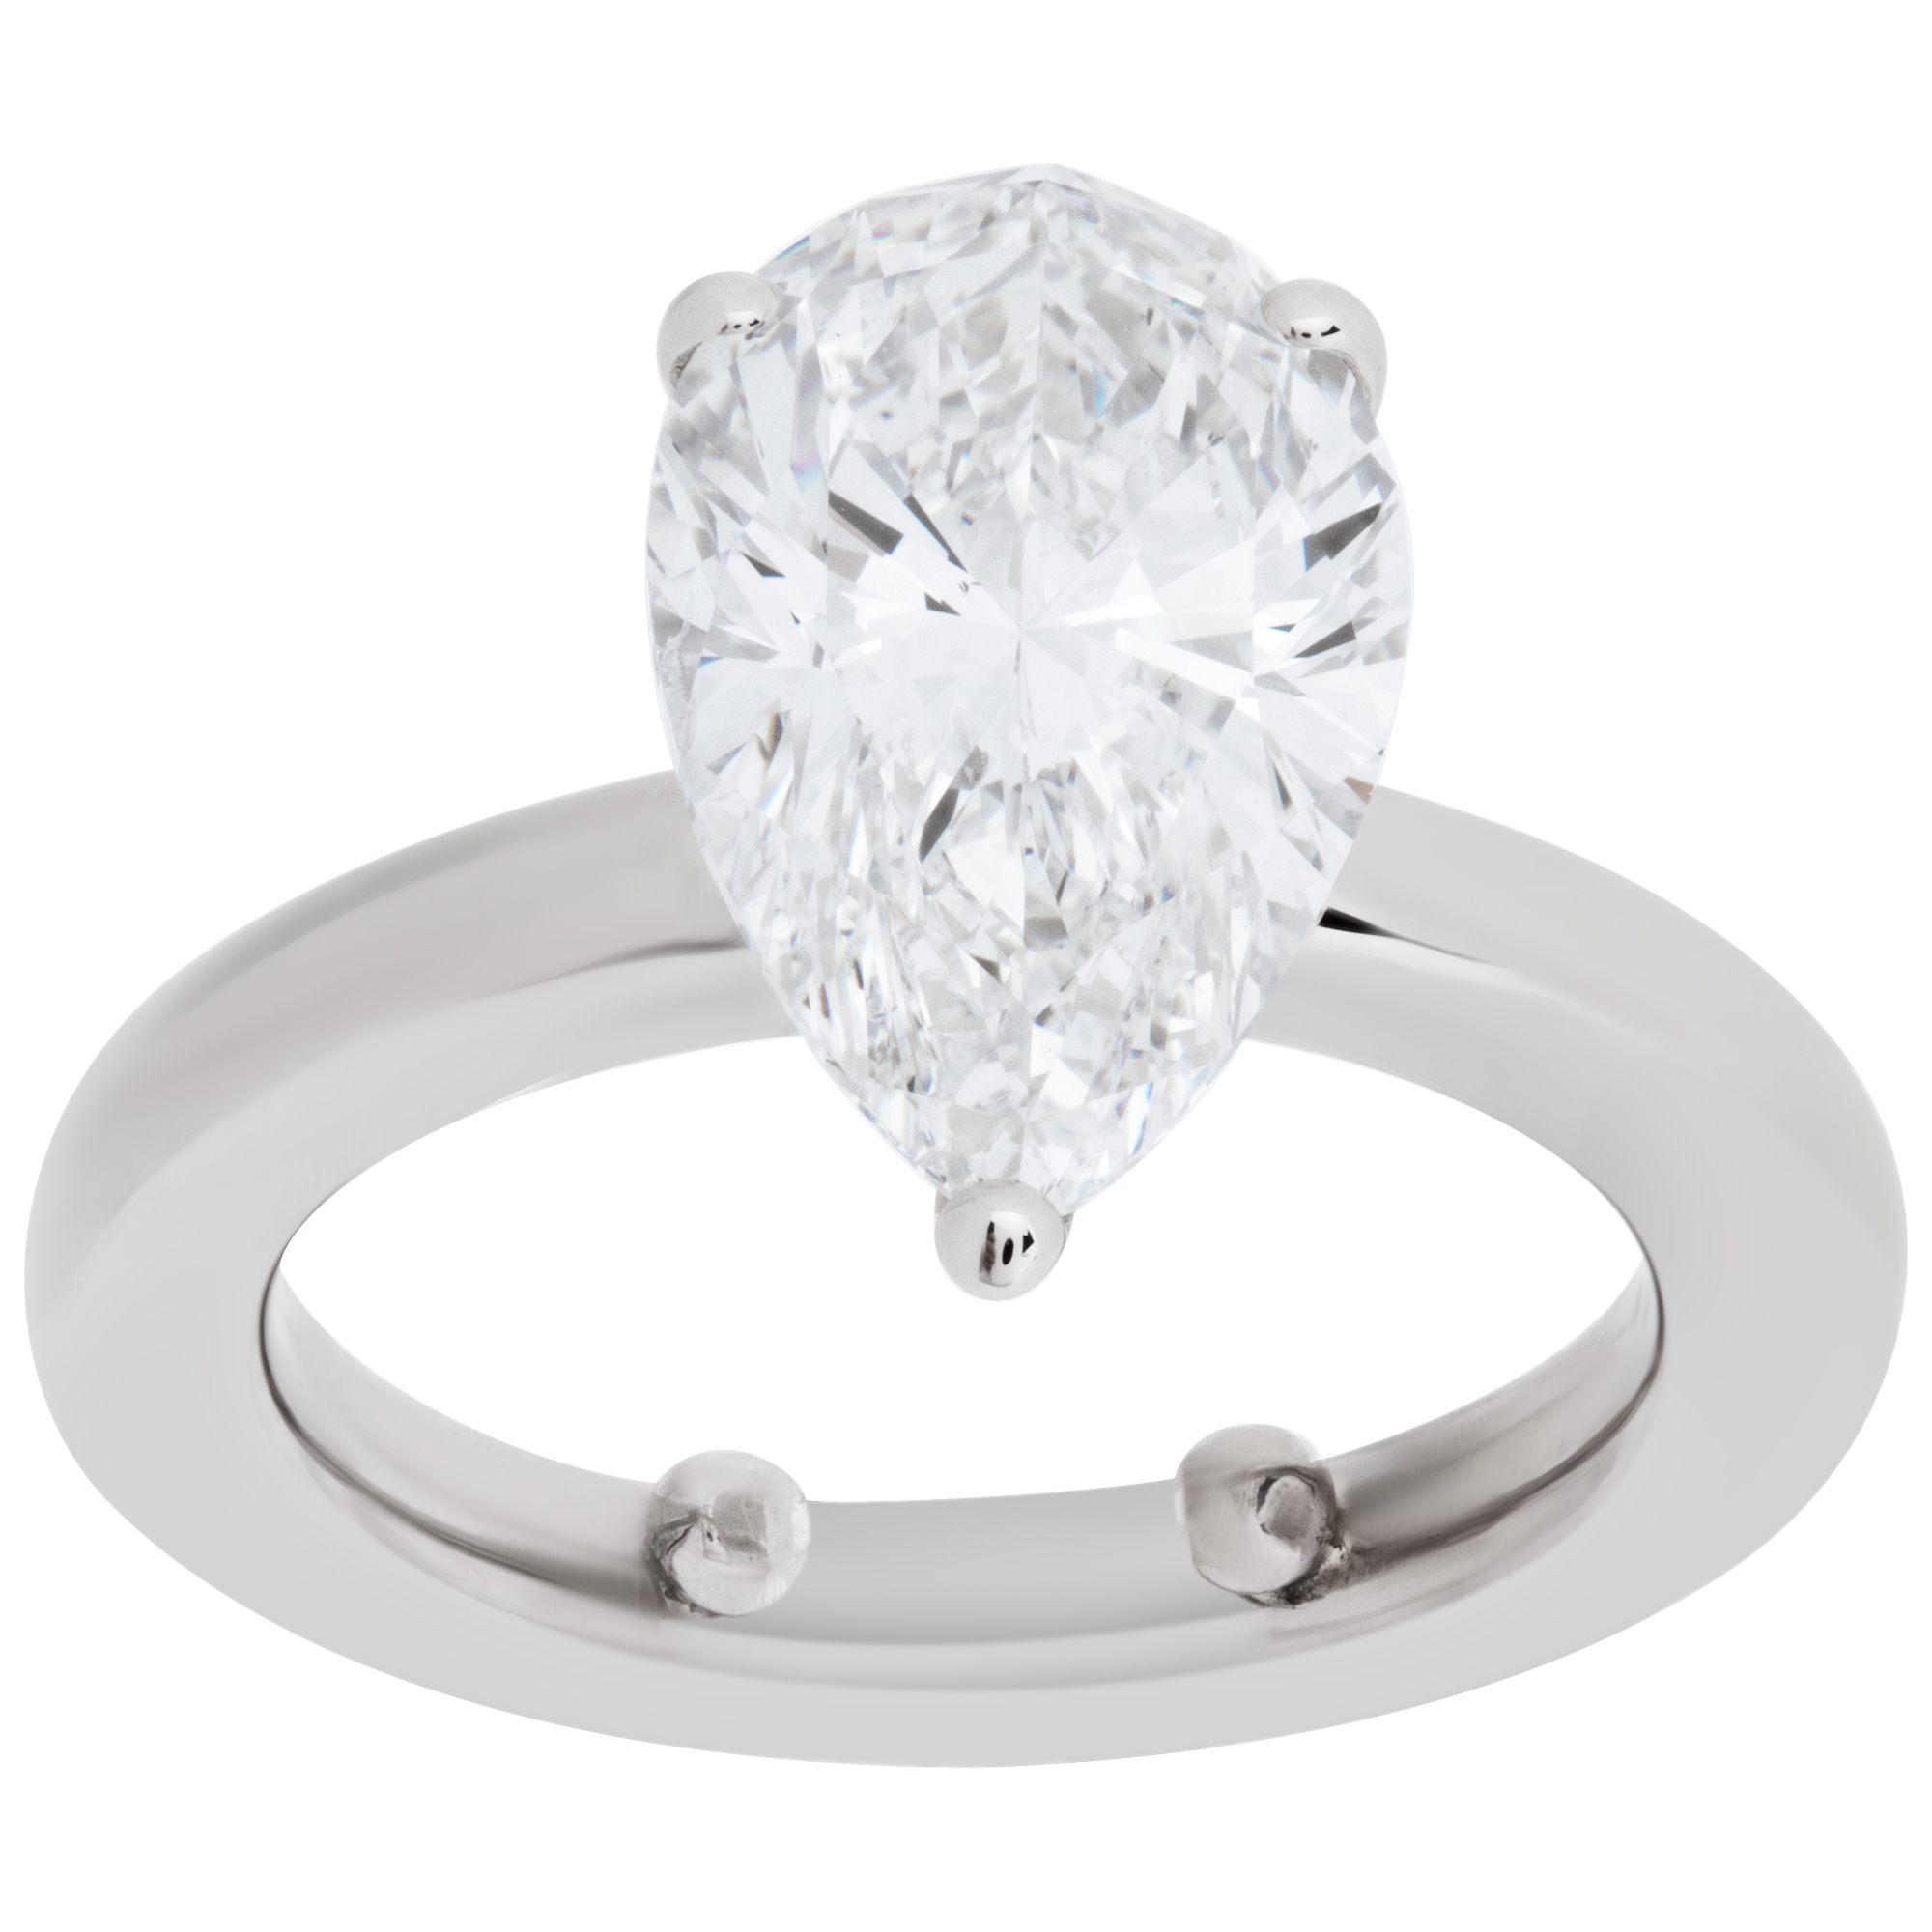 GIA certified pear shape 3.18 carat diamond (J color, SI2 clarity) ring set in platinum image 1